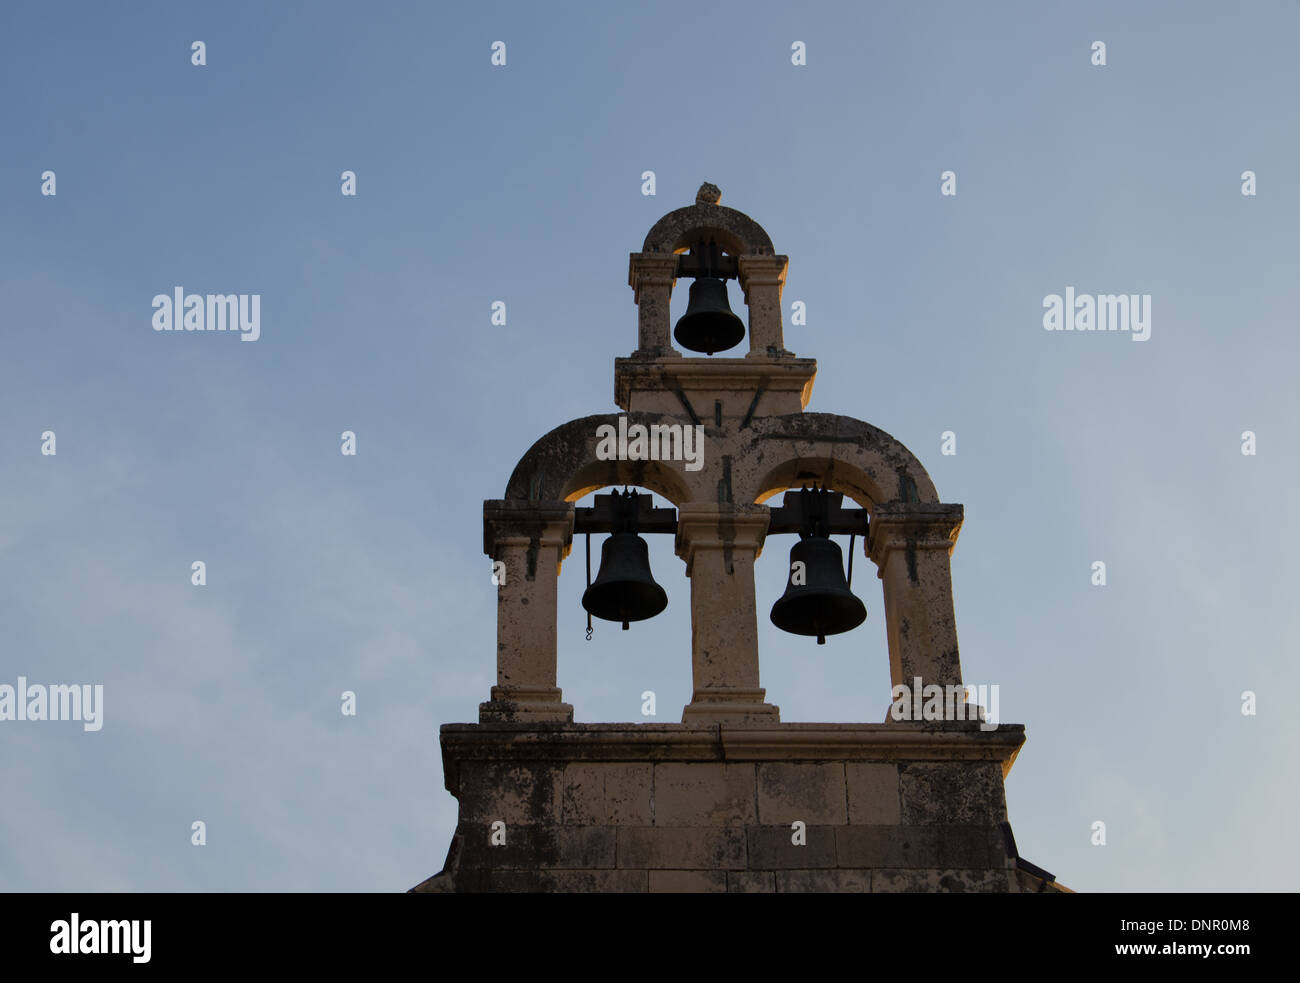 a bell tower in dubrovnik Stock Photo